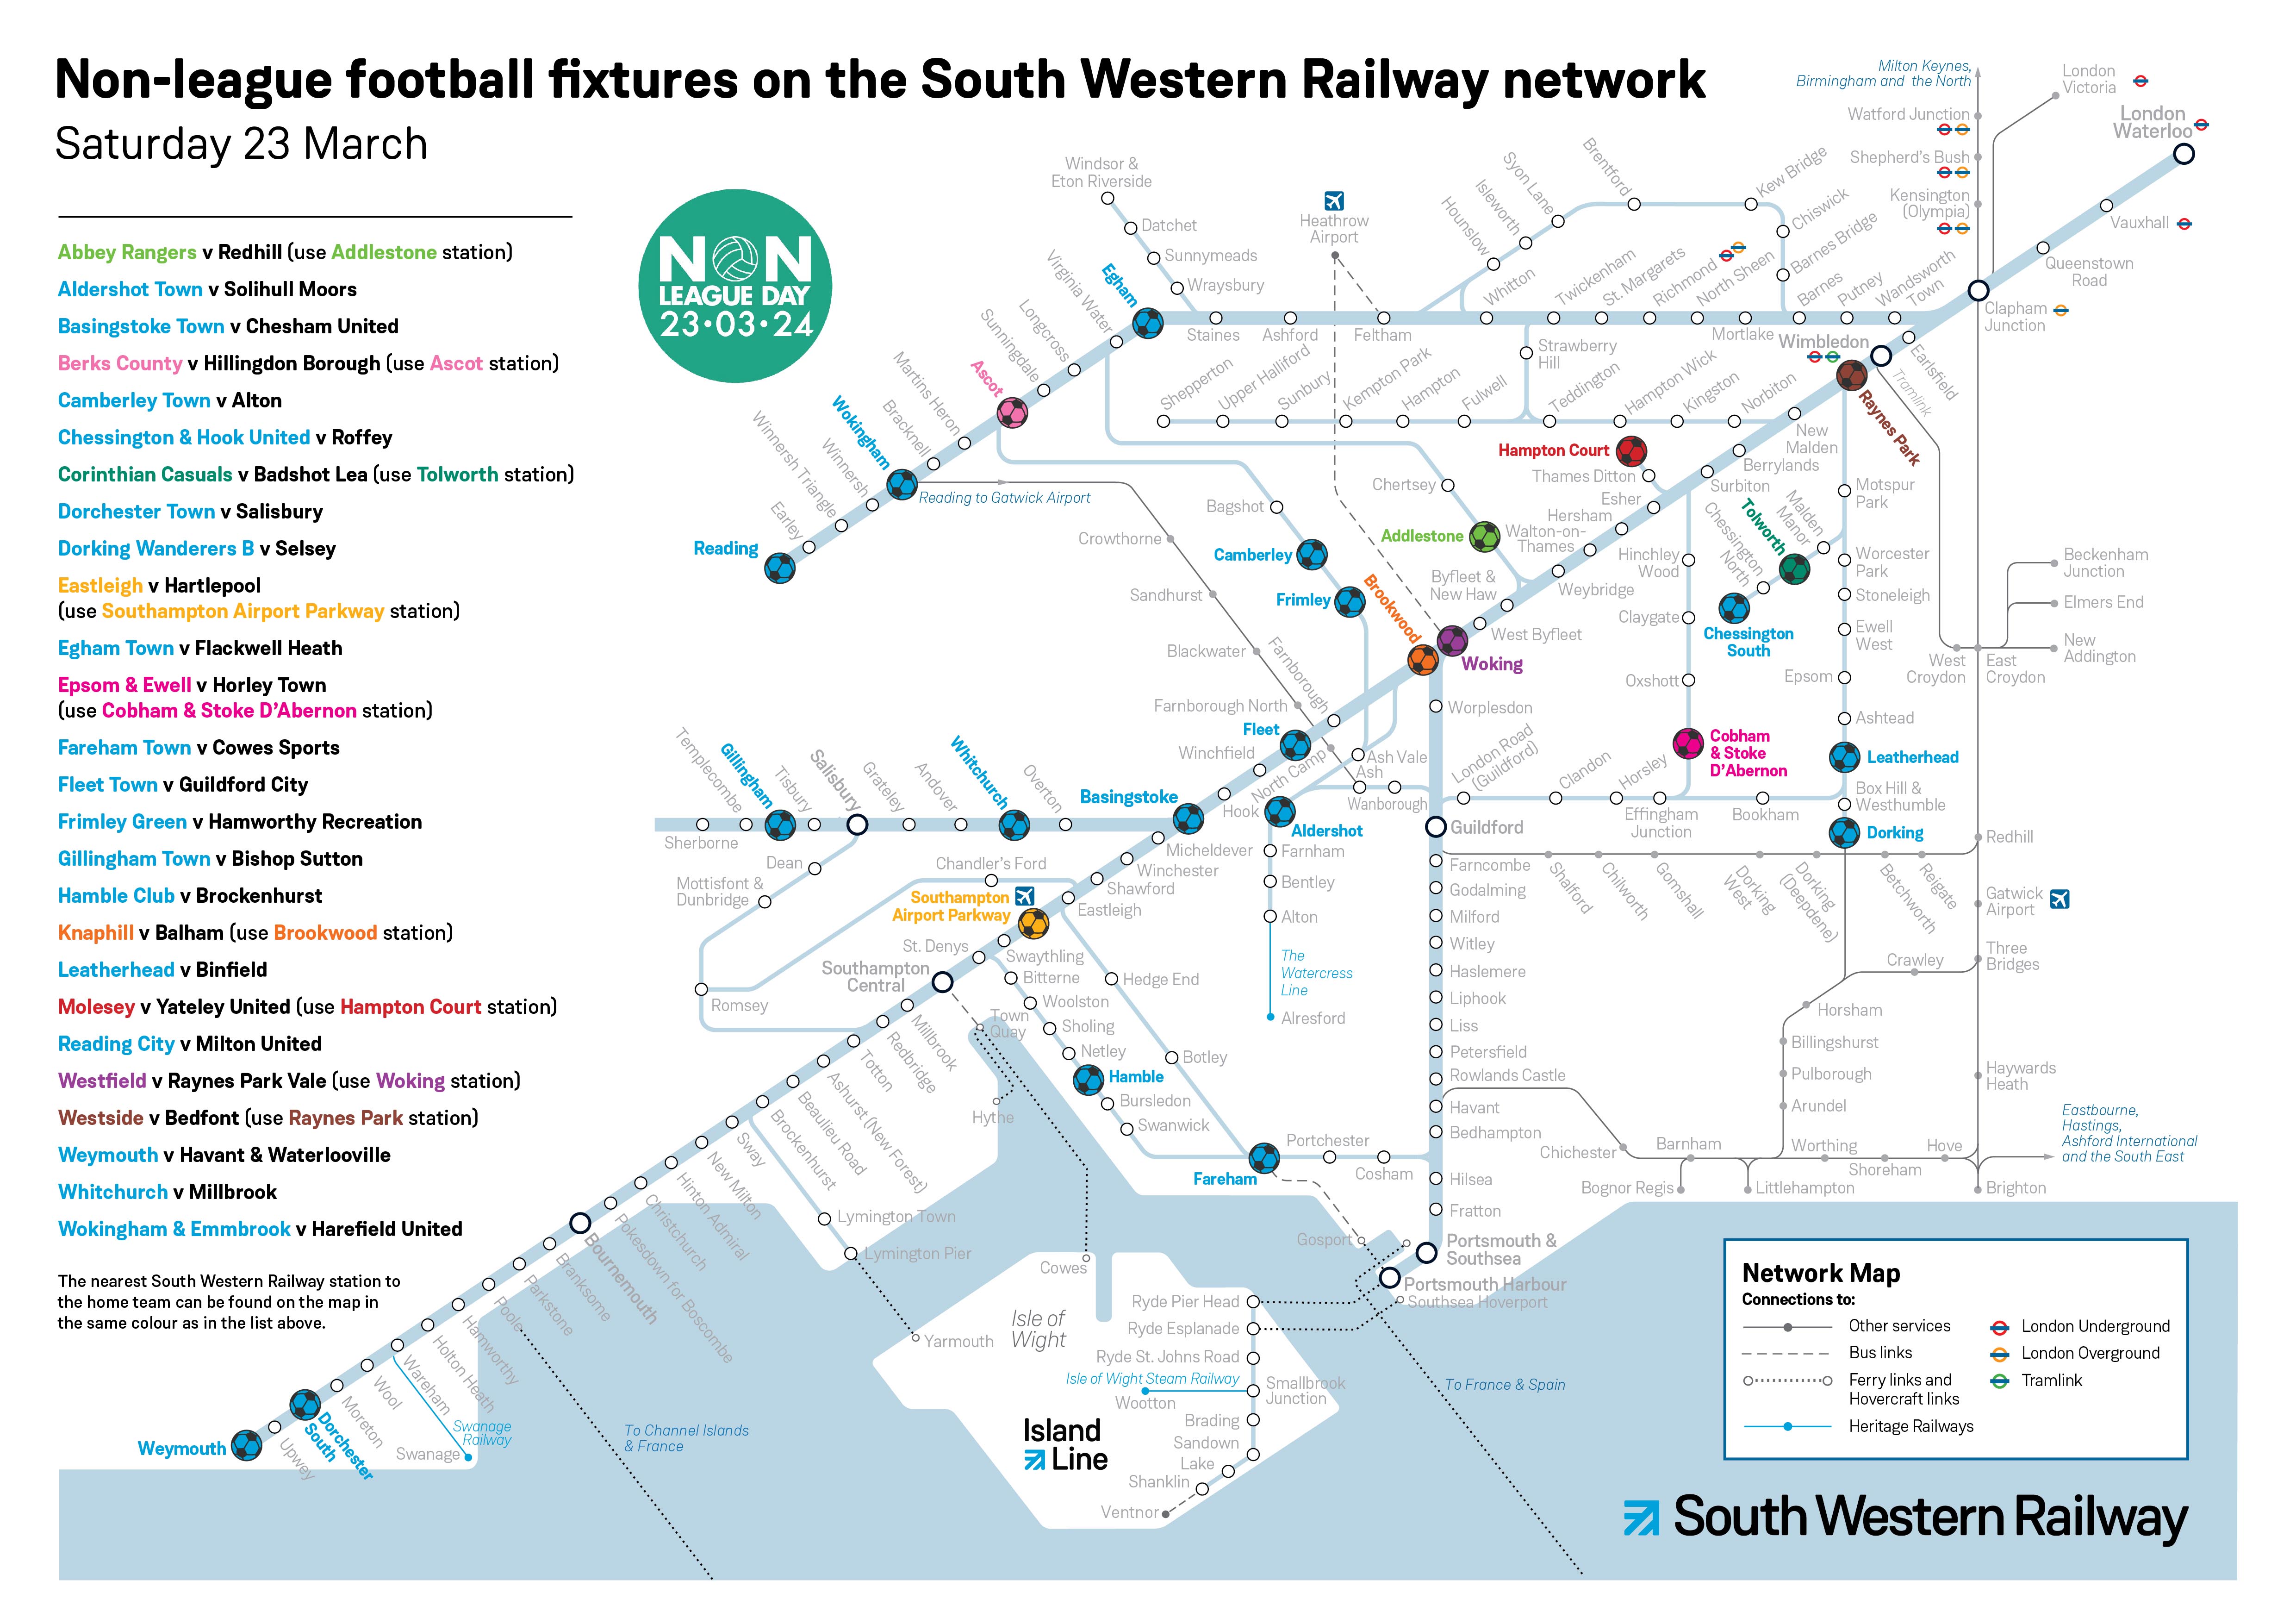 Non-League Day network map I South Western Railway